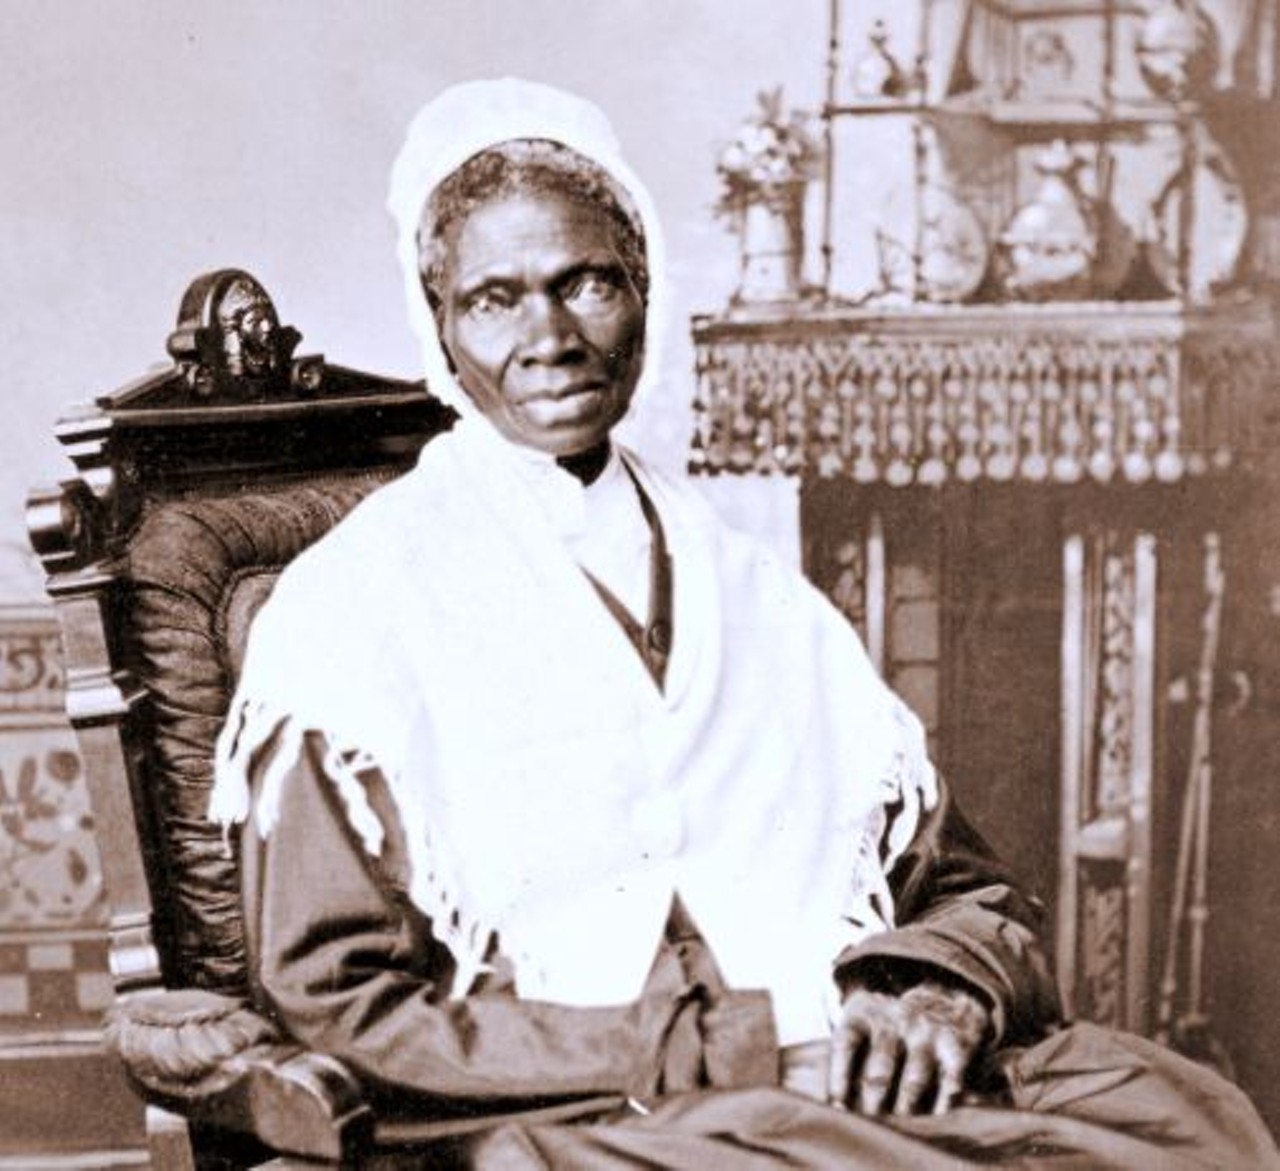 Sojourner Truth
Born into slavery in Swartekill, New York in 1797, Truth escaped to freedom in the late 1820s. After meeting Frederick Douglass and William Lloyld Garrison in New York City, Truth became an outspoken abolitionist. After the Civil War, she continued to speak on issues including prison reform, women&#146;s rights, and aid for former slaves. Following her death in 1883, she was buried in Oak Hill Cemetery in Battle Creek.
Photo via National Portrait Gallery / Wikimedia Commons